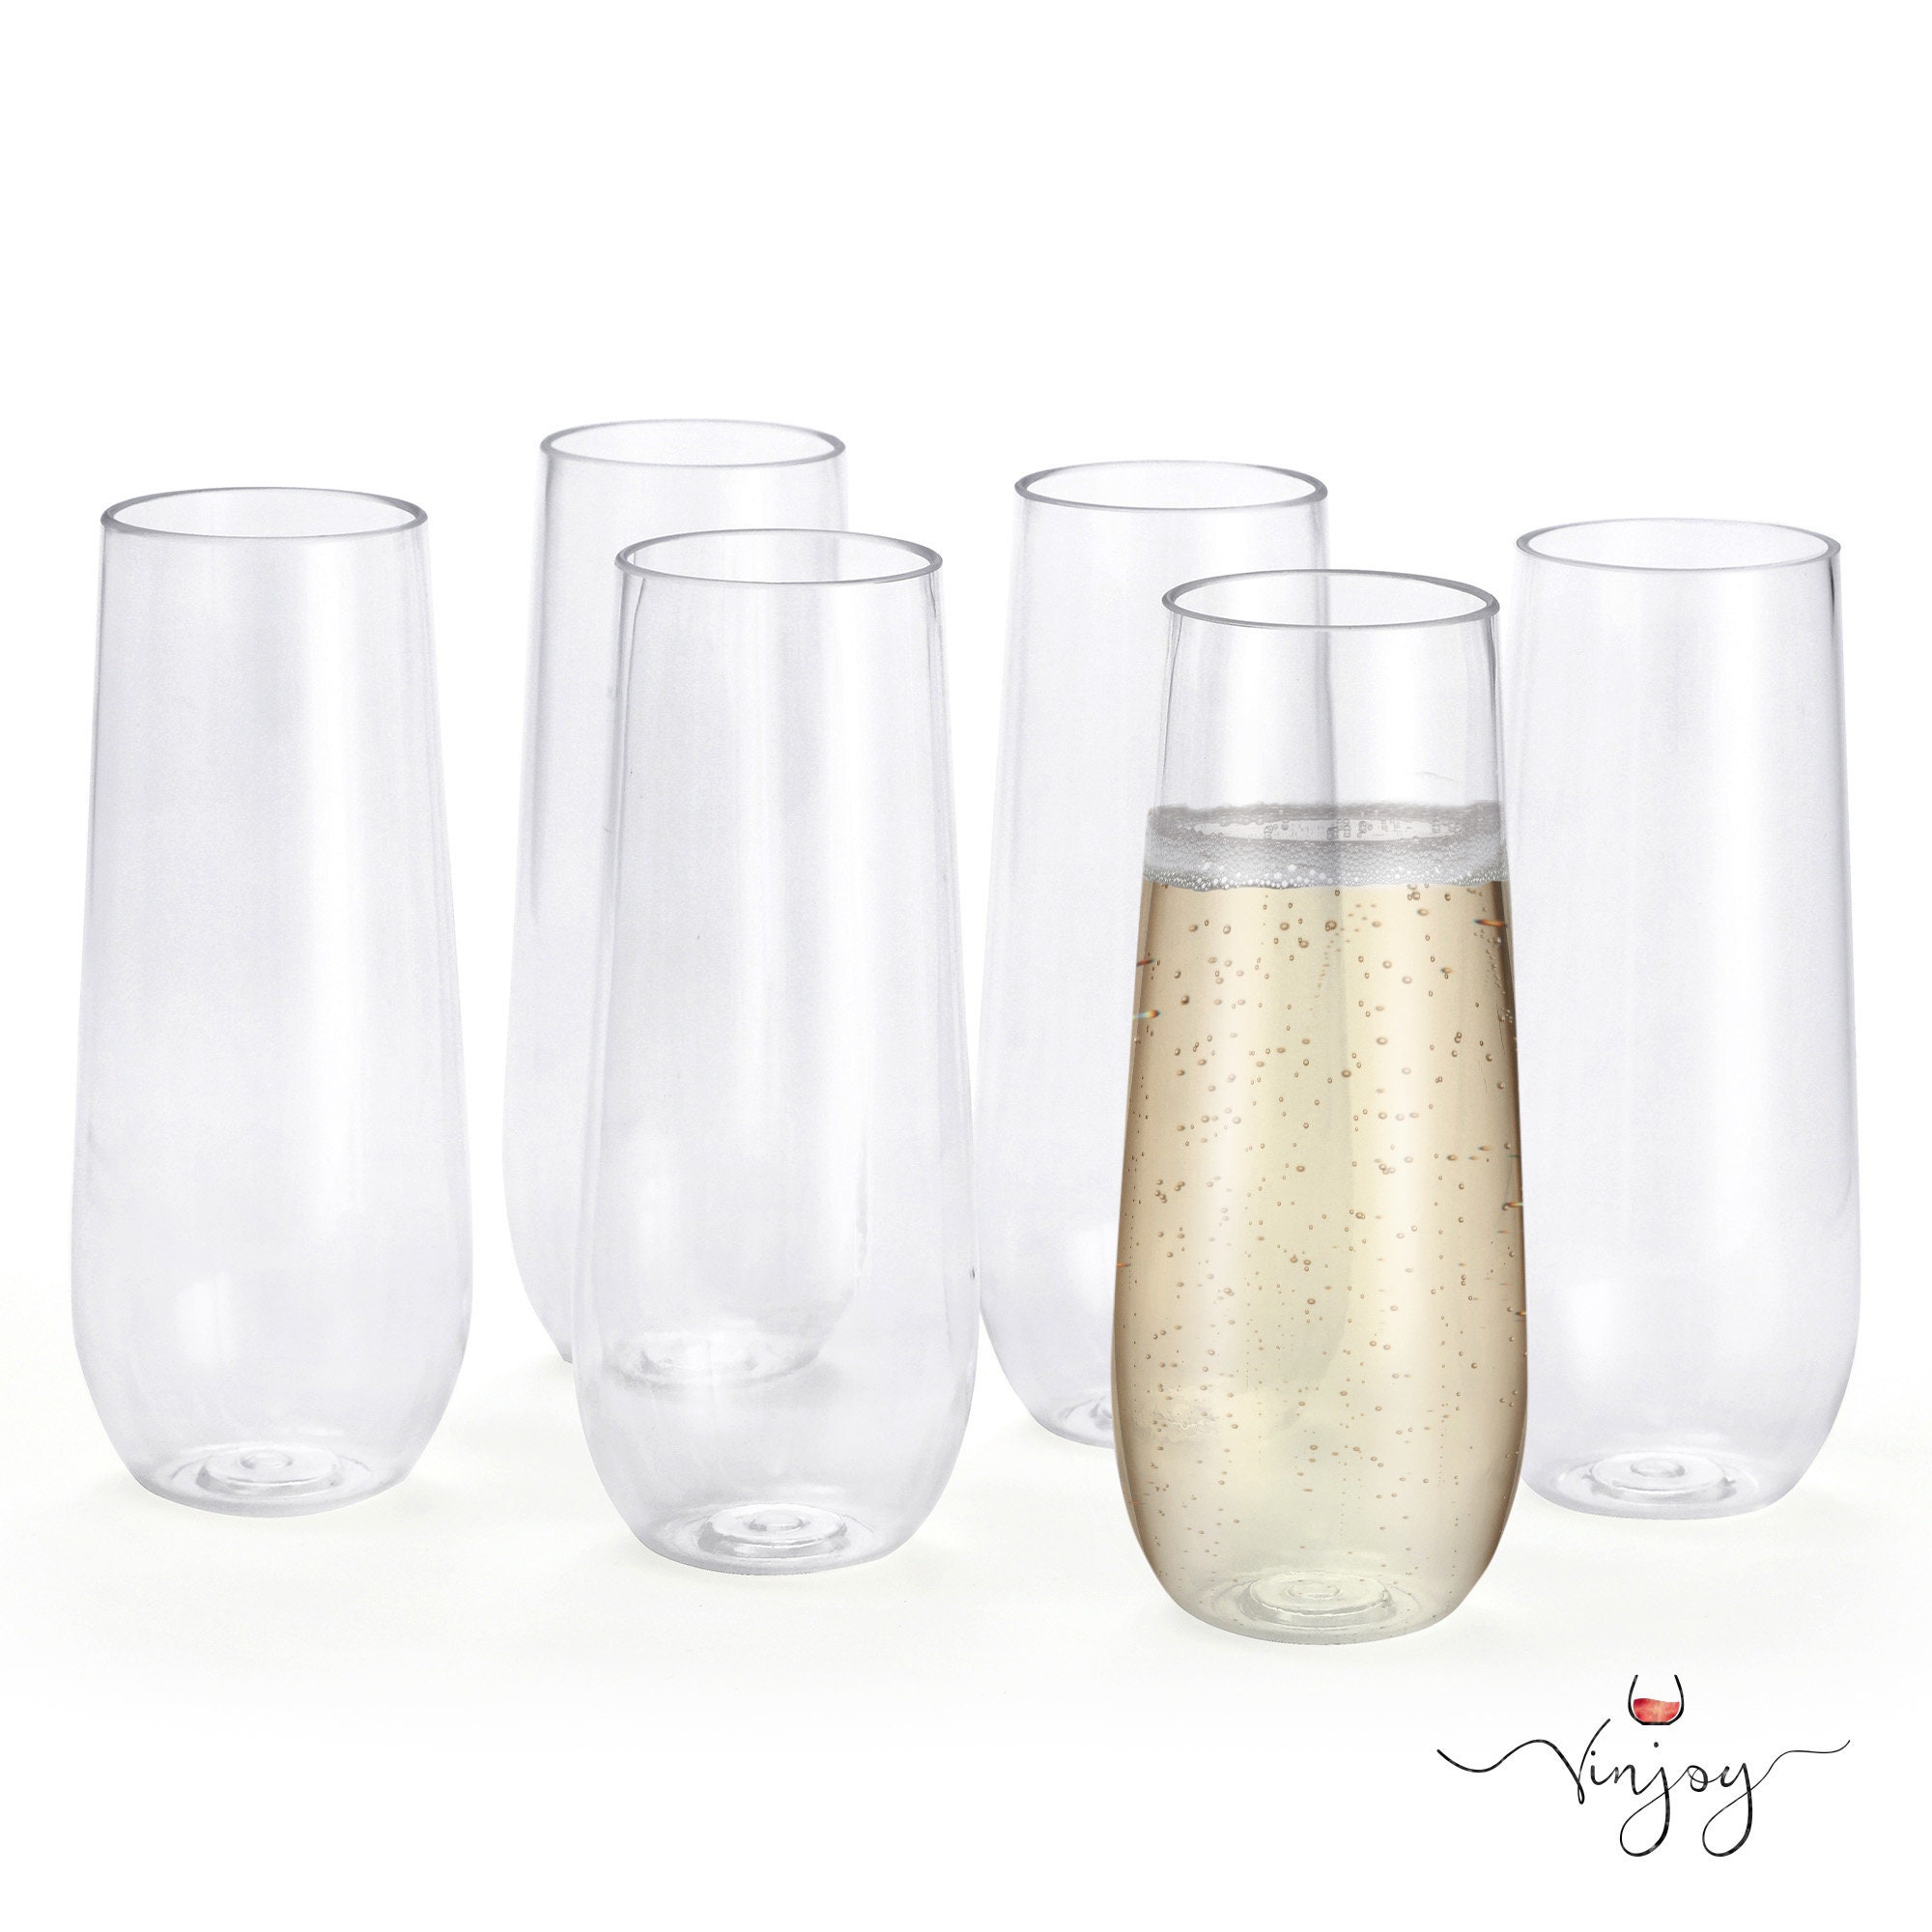 US Acrylic Plastic Reusable Champagne Flute (Set of 12) Clear 5oz Stems |  BPA-Free, Shatterproof, Made in USA | Top-Rack Dishwasher Safe